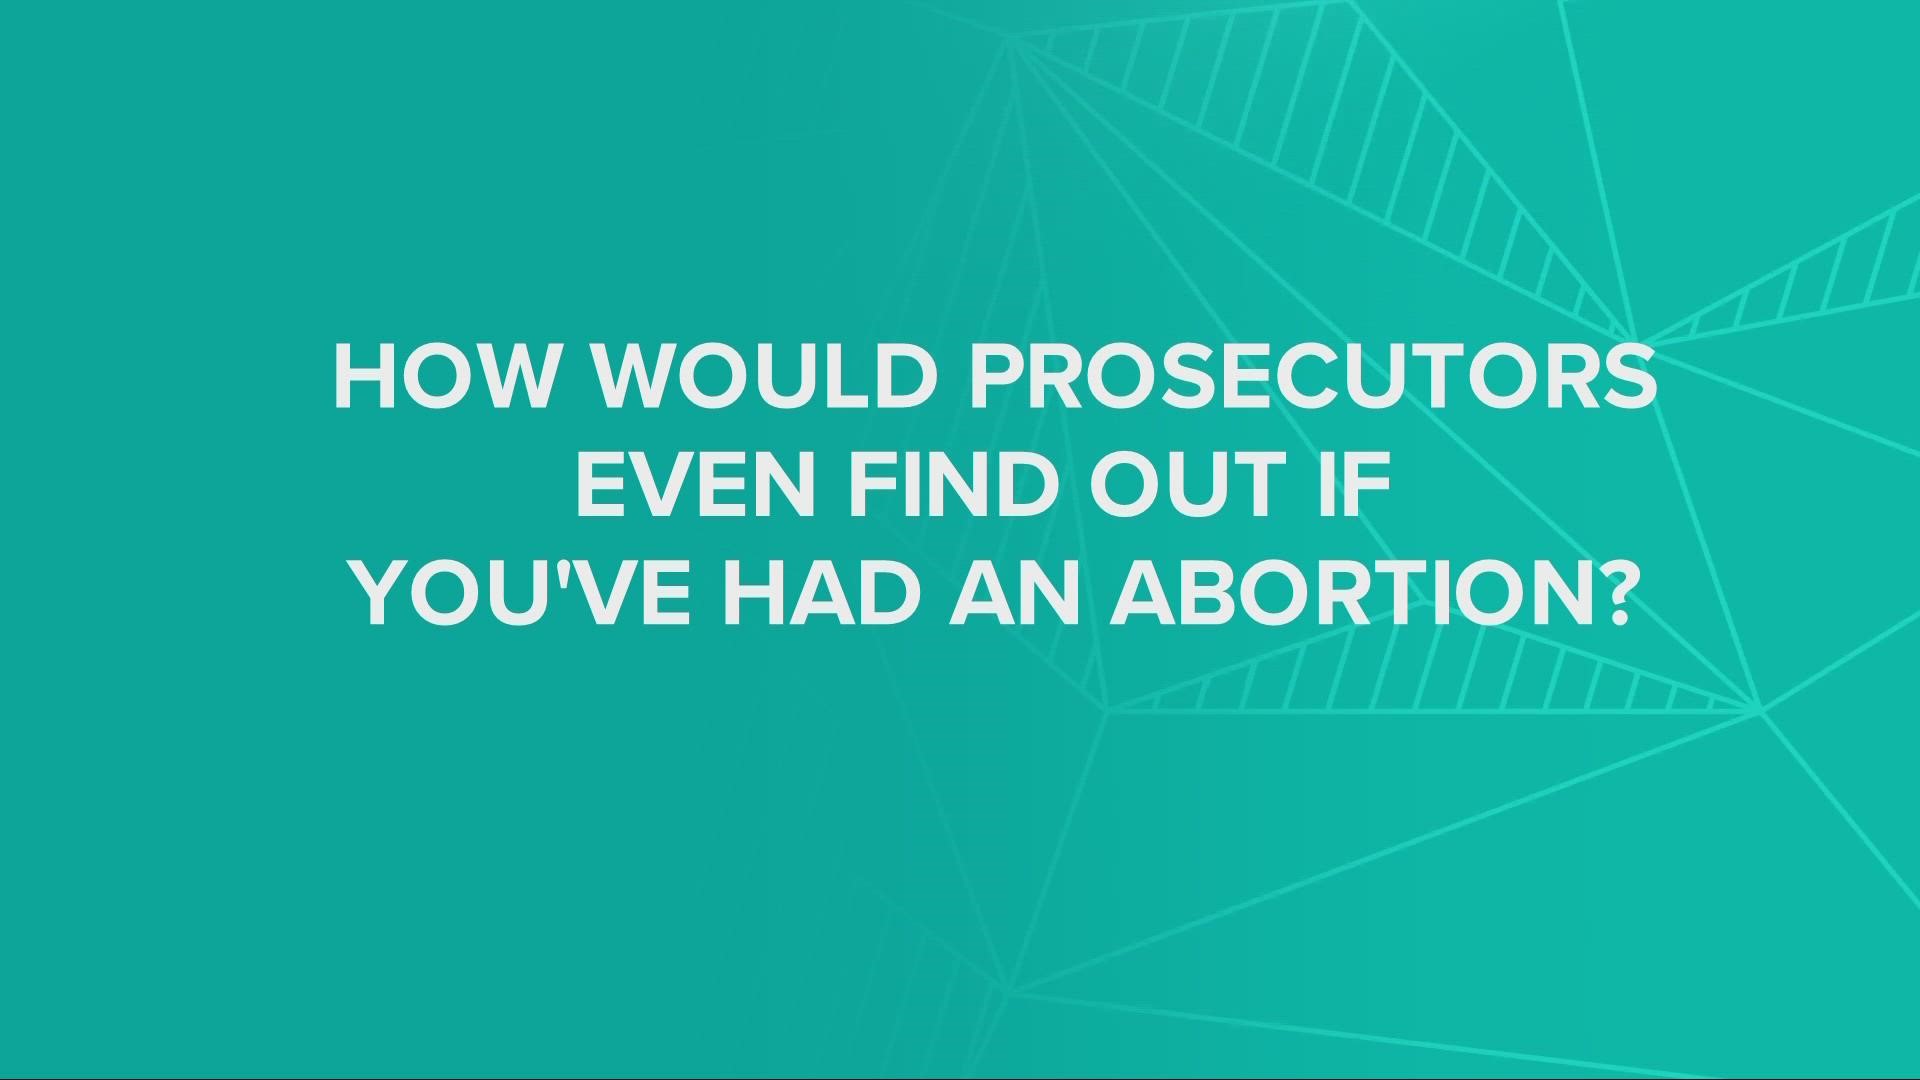 Where does reproductive rights stand on the legal front?